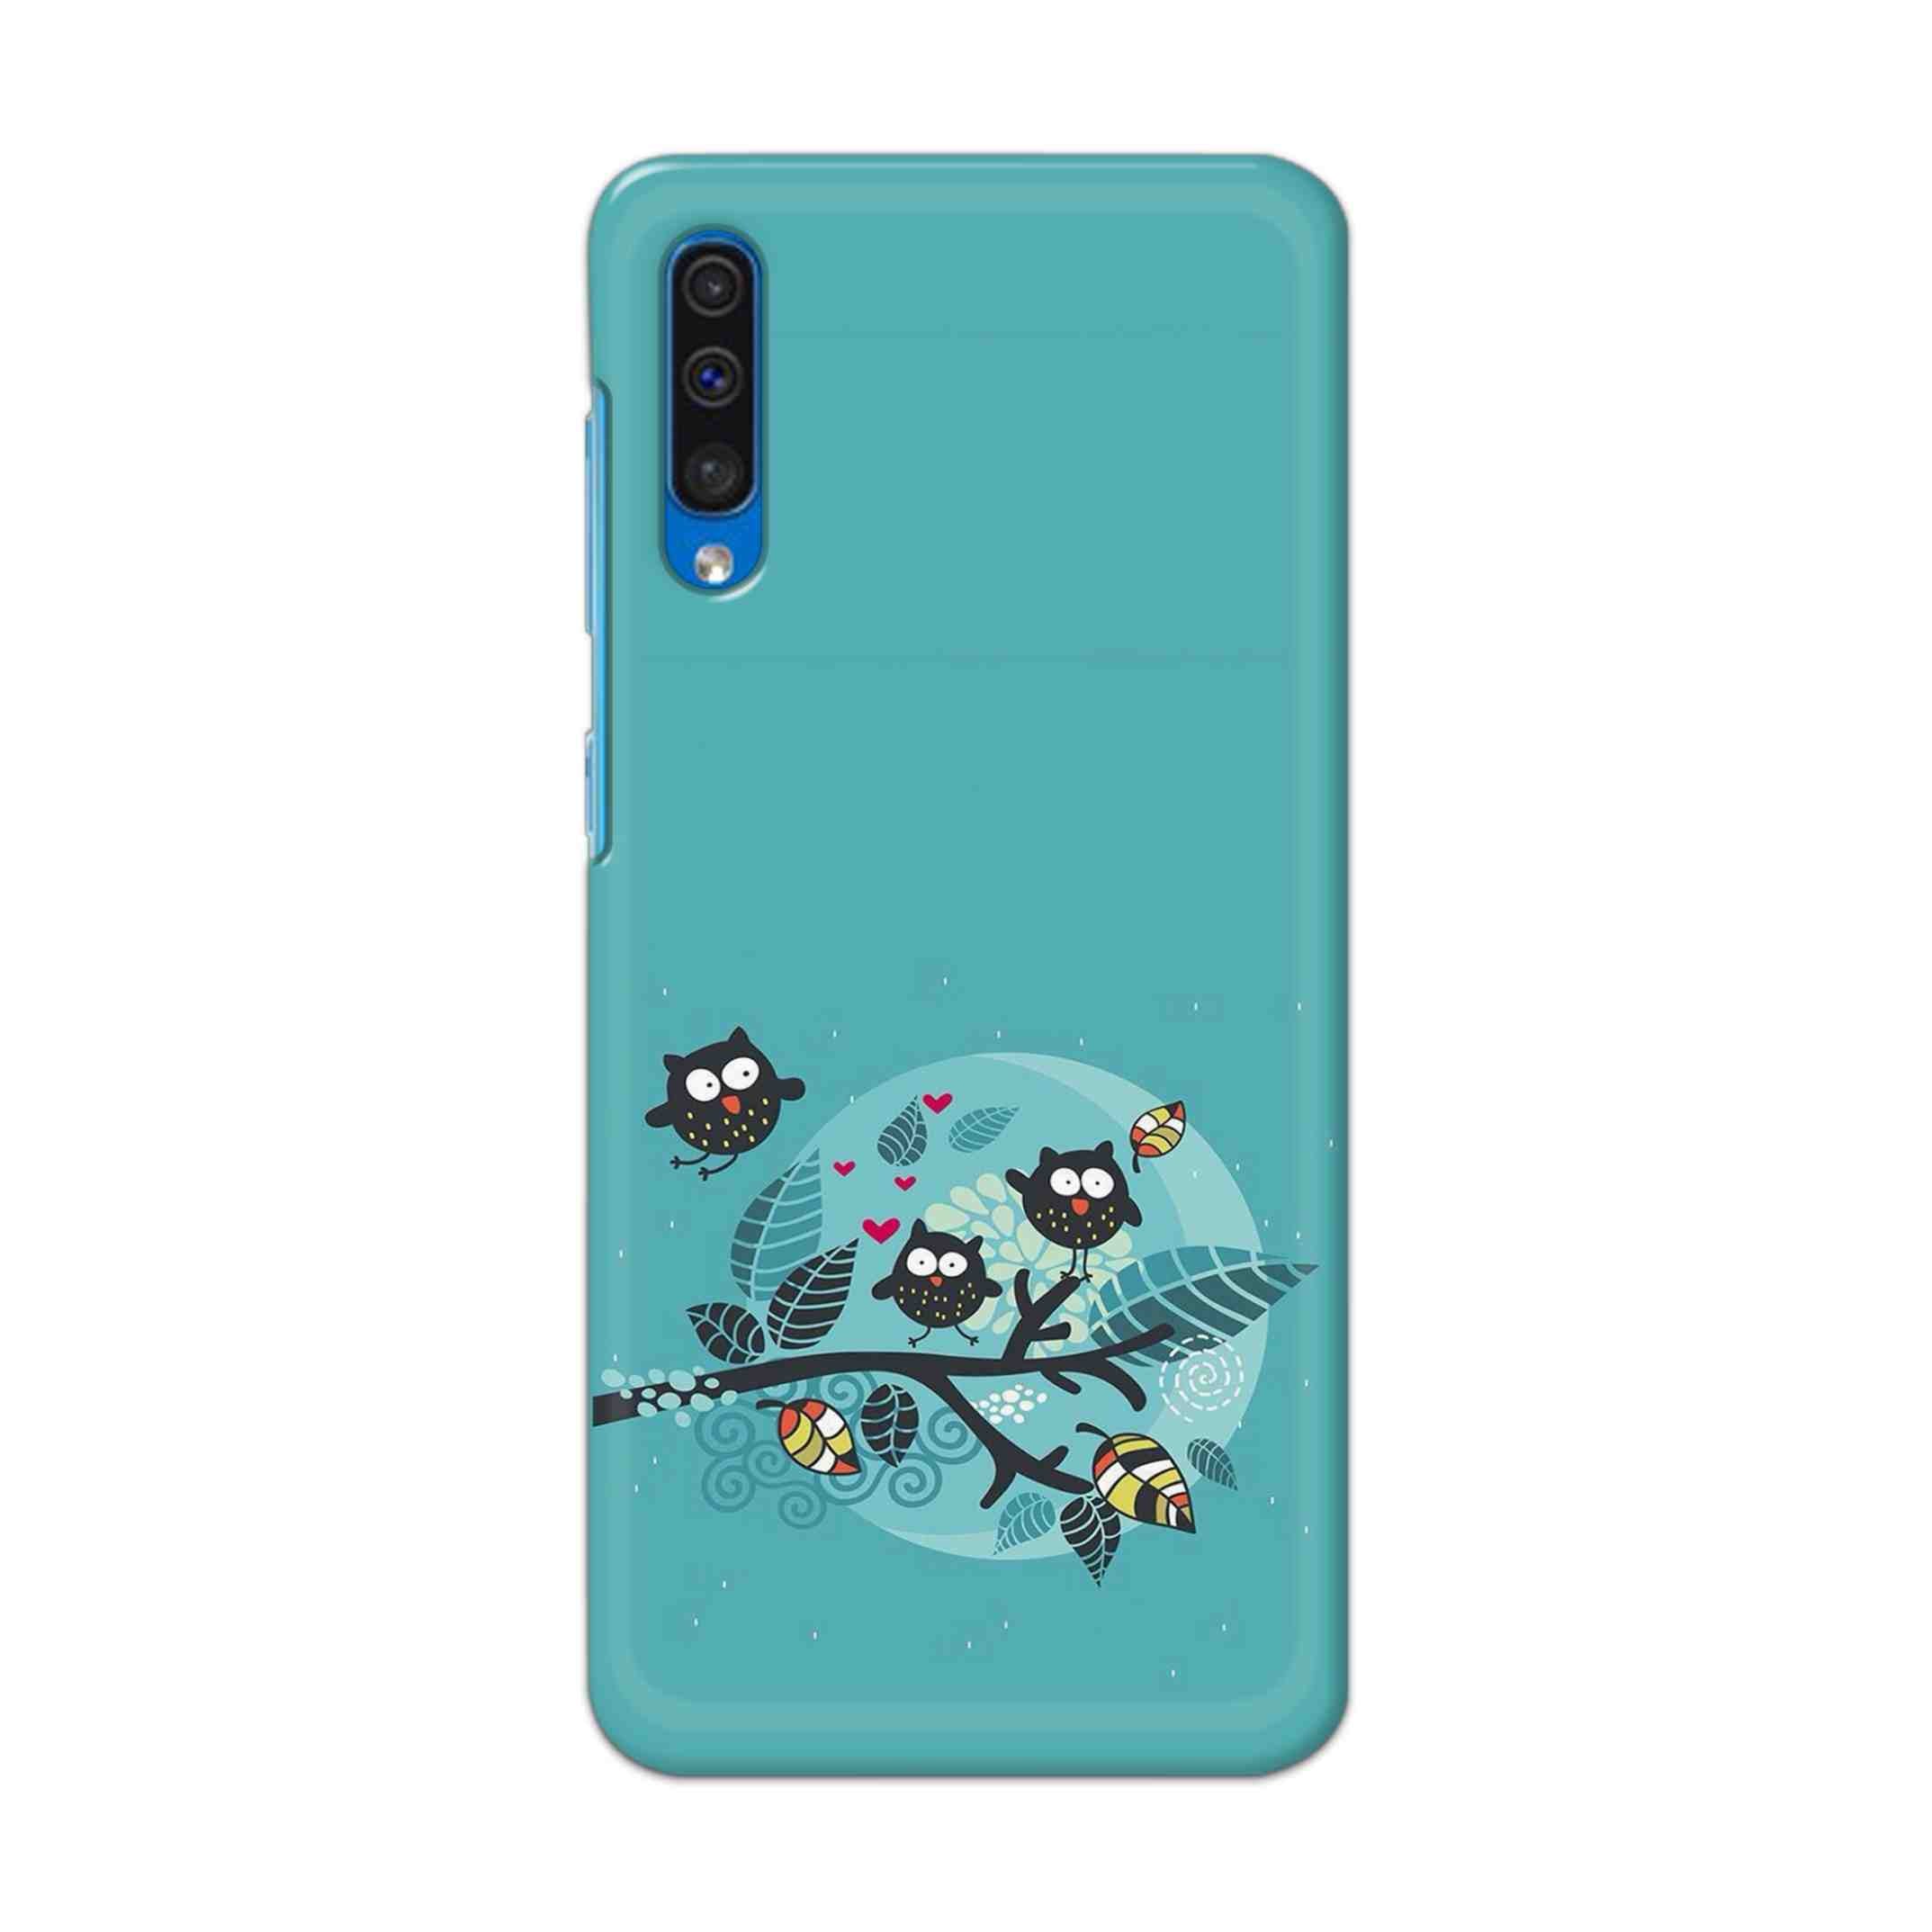 Buy Owl Hard Back Mobile Phone Case Cover For Samsung Galaxy A50 / A50s / A30s Online